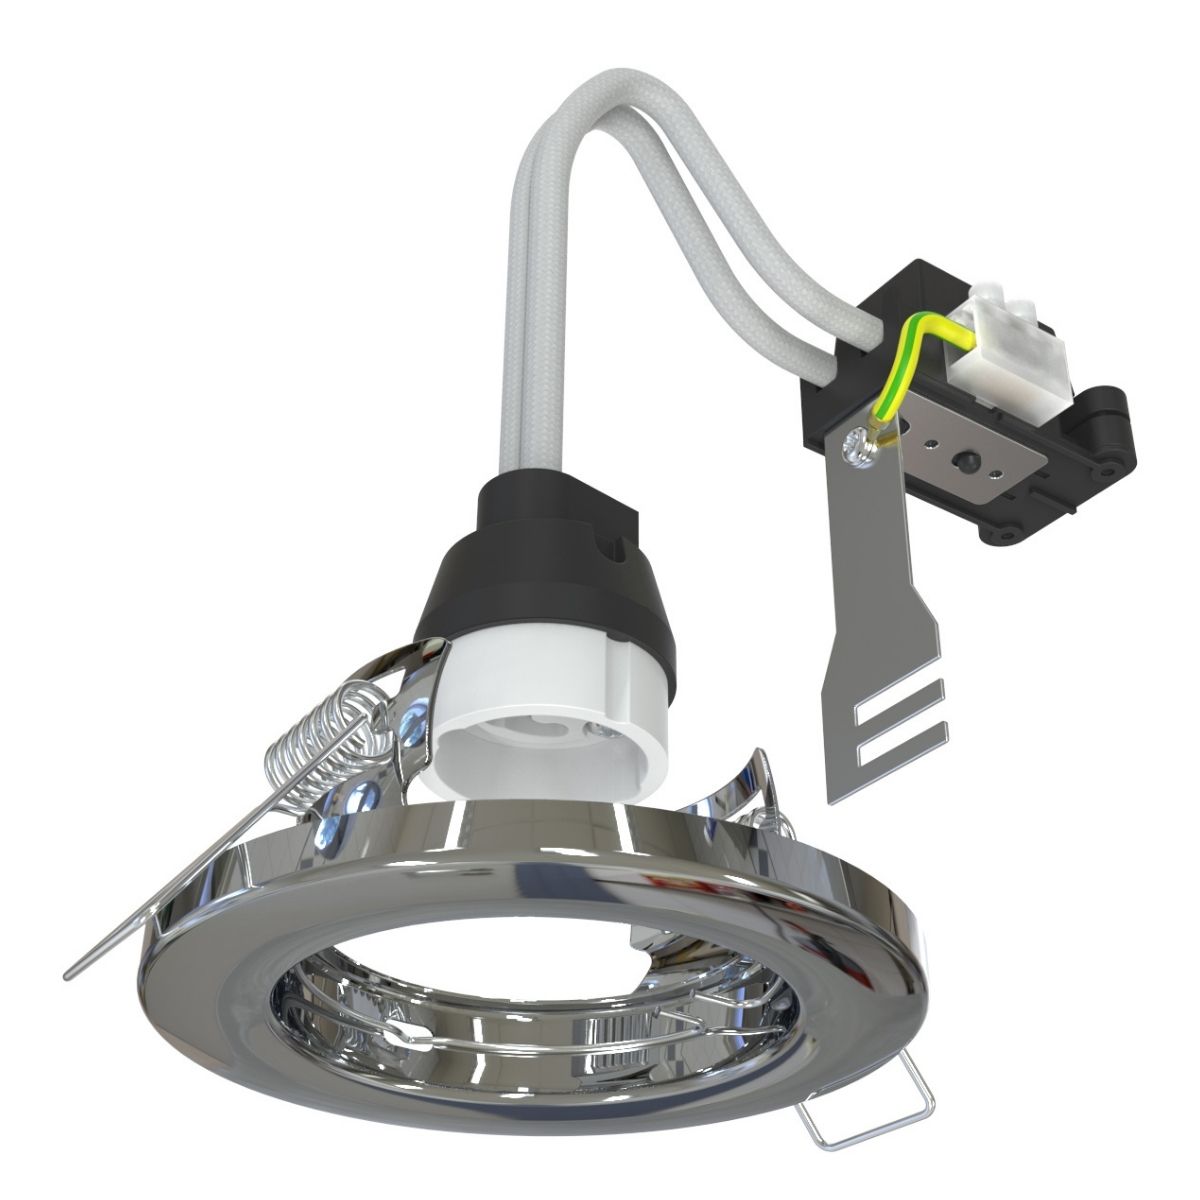 View Recessed GU10 Downlight In a Polished Chrome Finish information